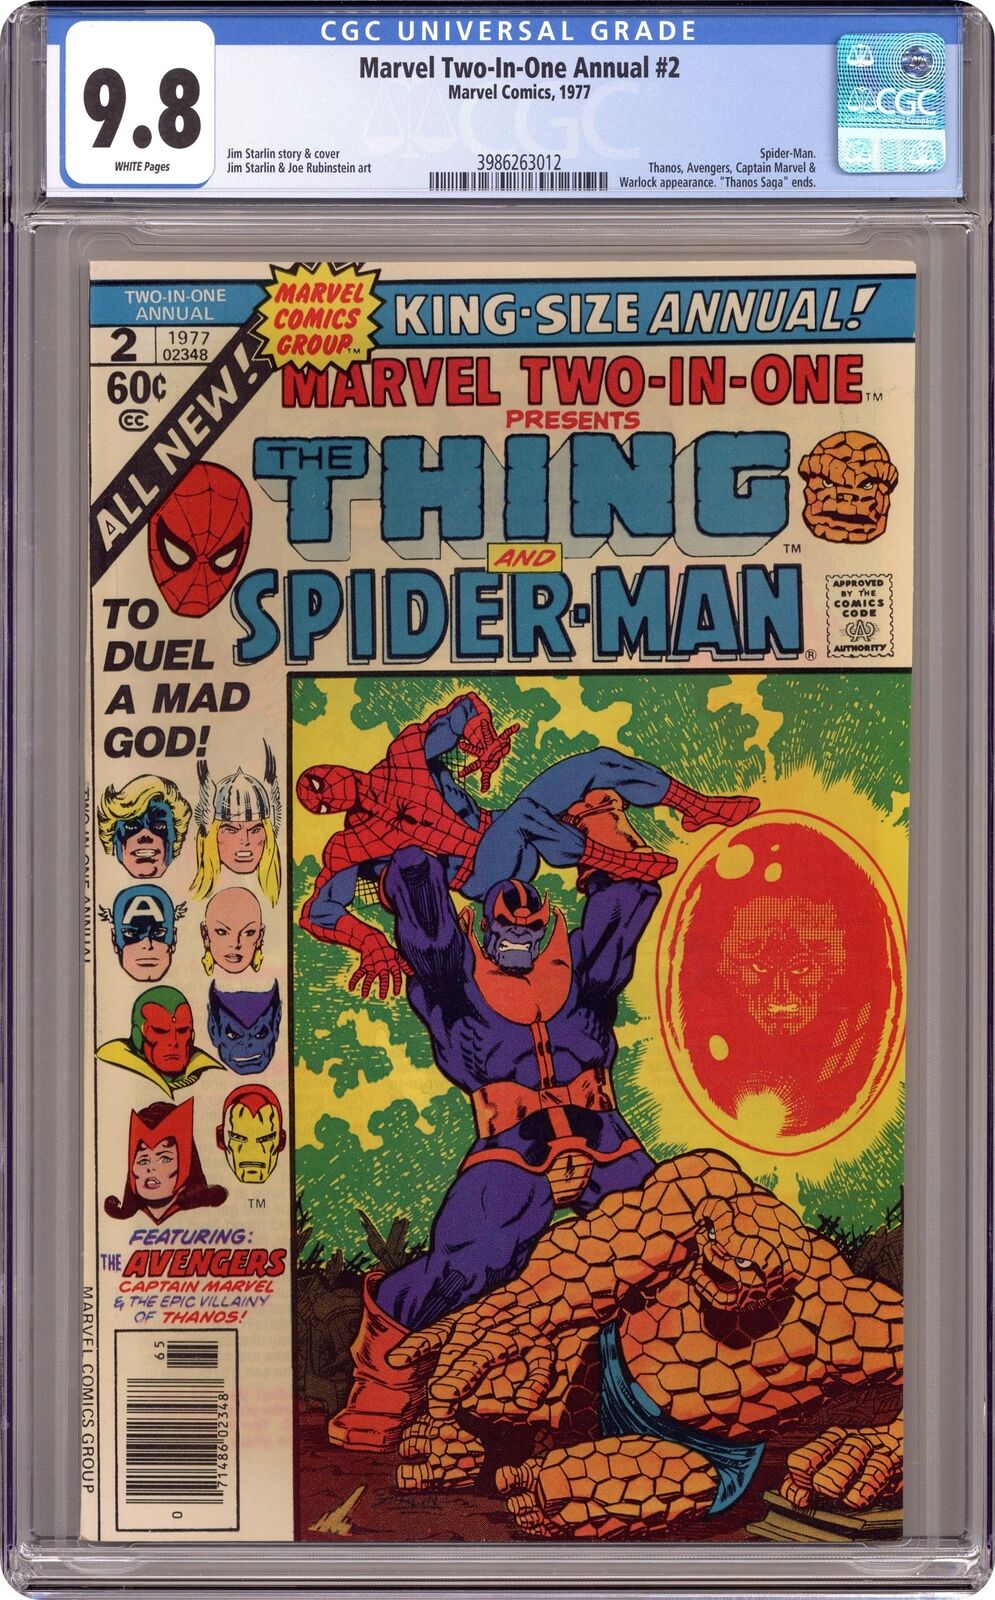 Marvel Two-in-One Annual #2 CGC 9.8 1977 3986263012